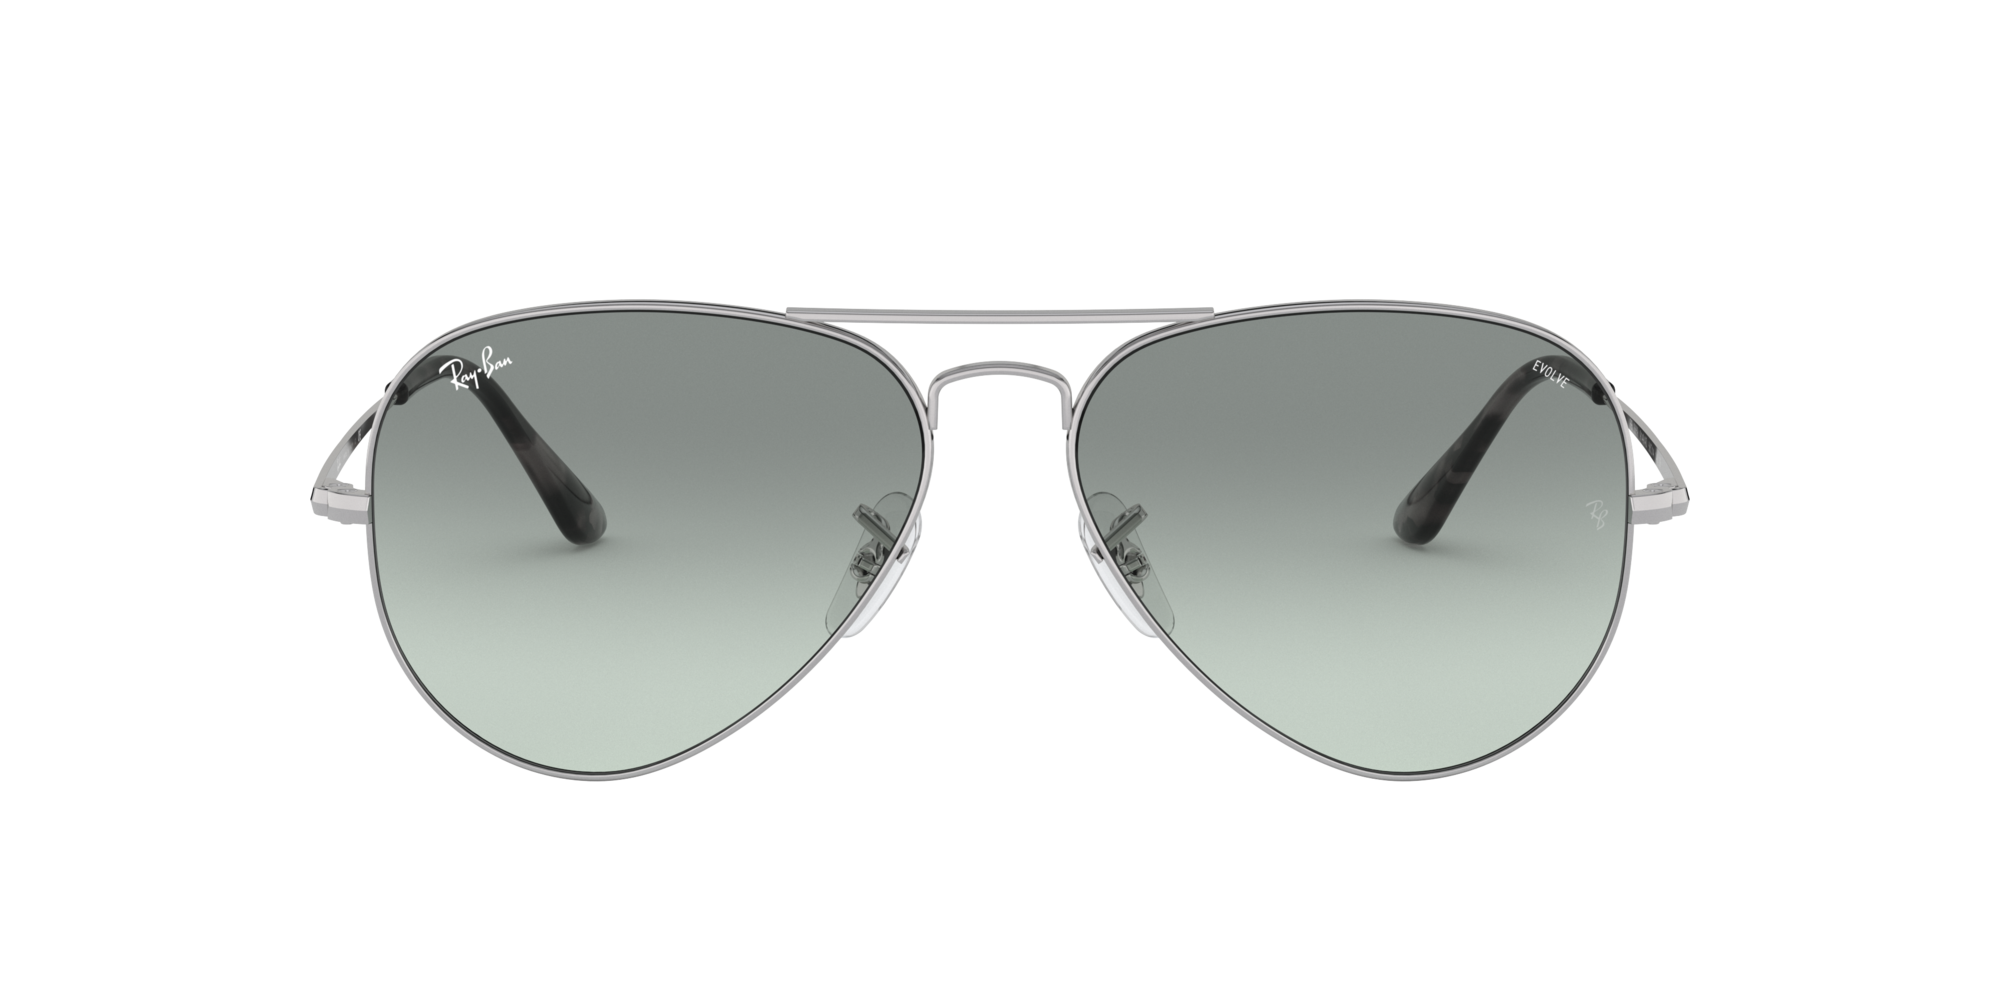 Ray Ban Rb36 9149 Ad 58 14 Silver Photochromic Gradient In Stock Price 85 79 Visiofactory